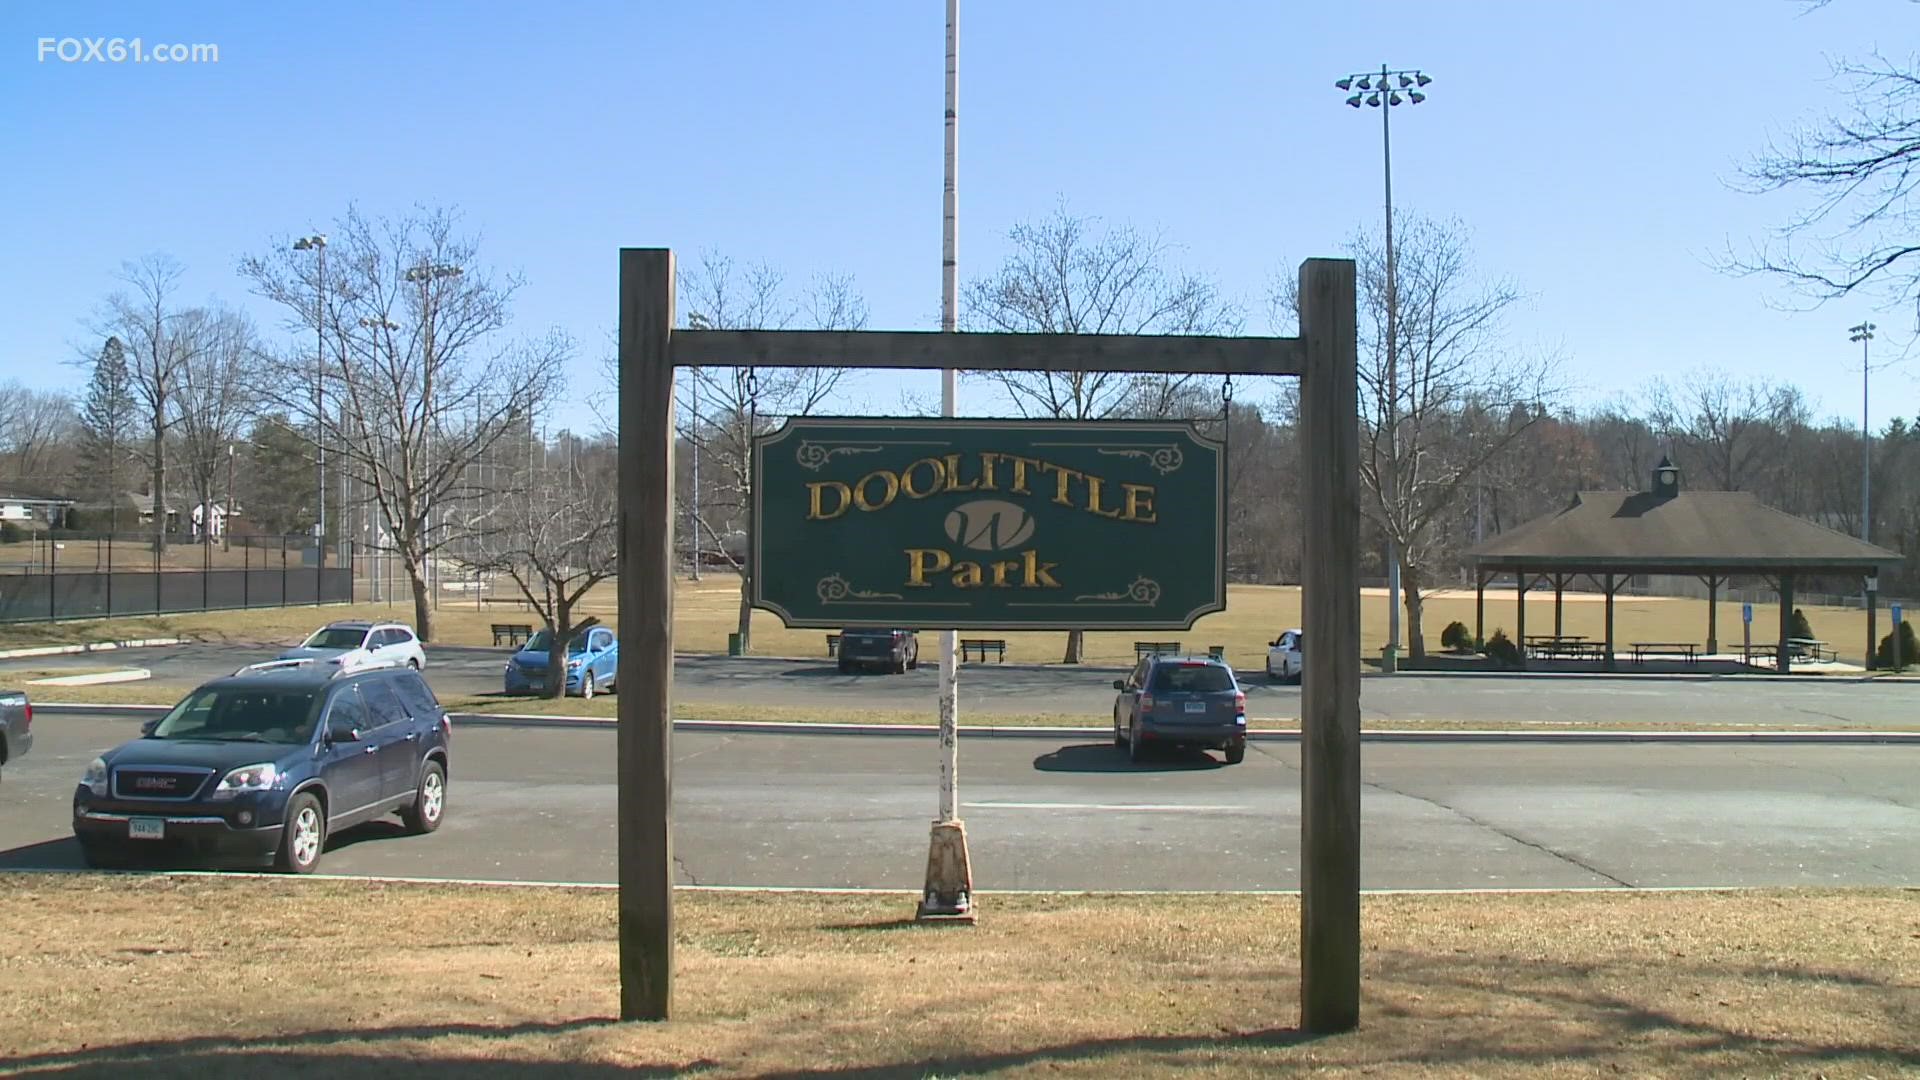 Firefighters extinguished the fire at the playscape, as well as smaller fires that were started on the basketball court and a nearby porta-potty, police said.